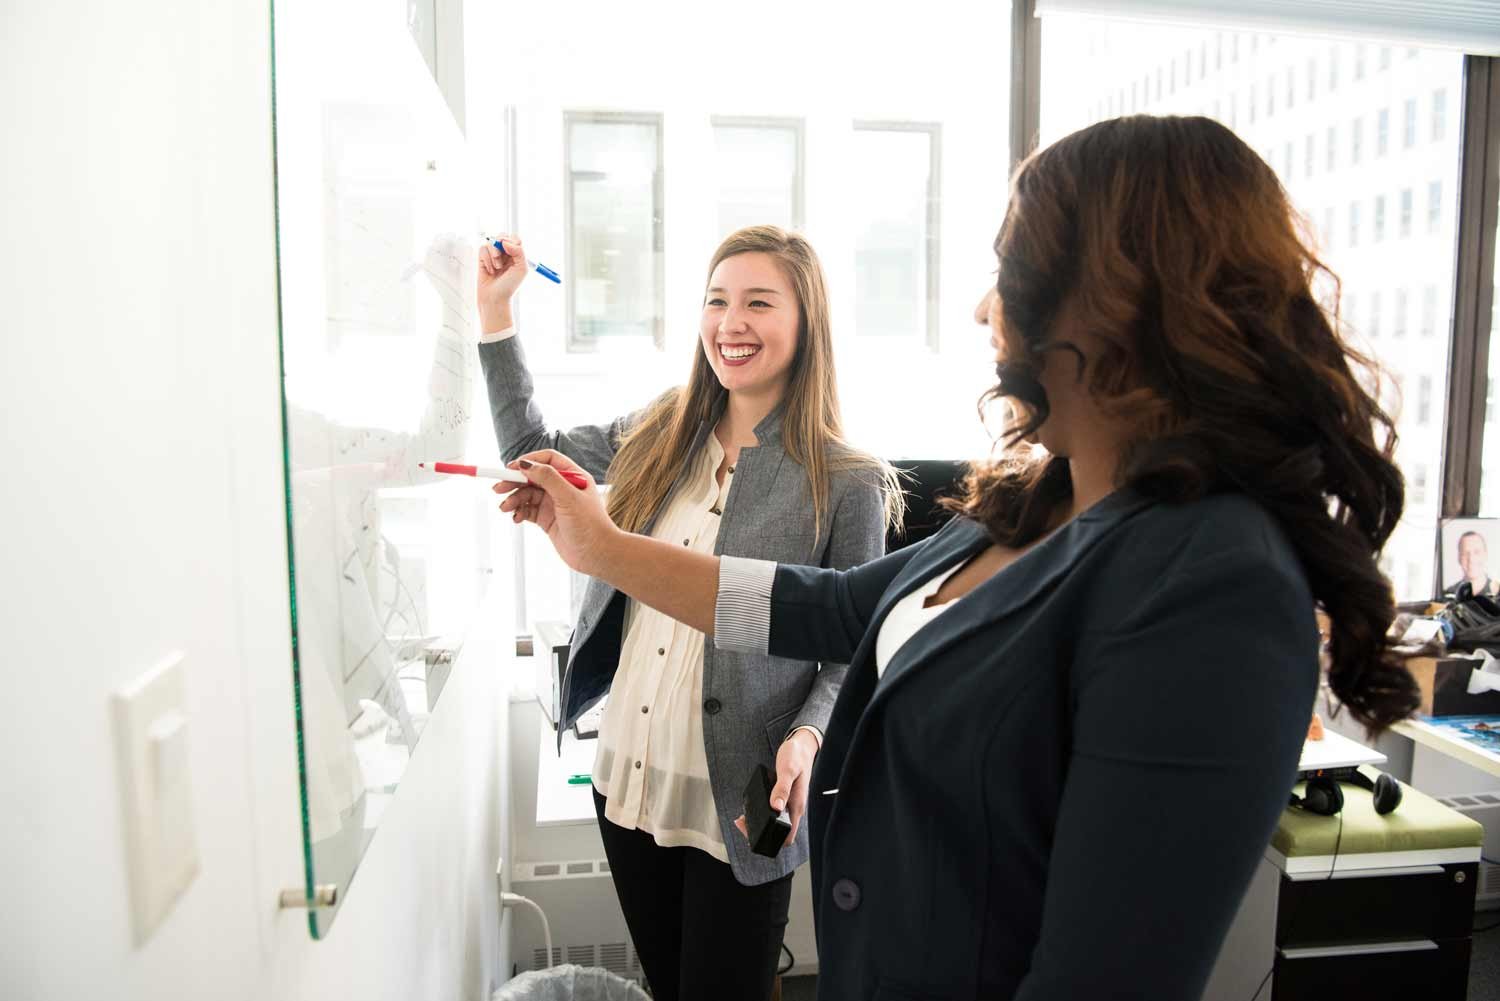 Two enthusiastic women collaborate on a whiteboard, crafting a dynamic HubSpot strategy for managing their distinct business units with a smile.